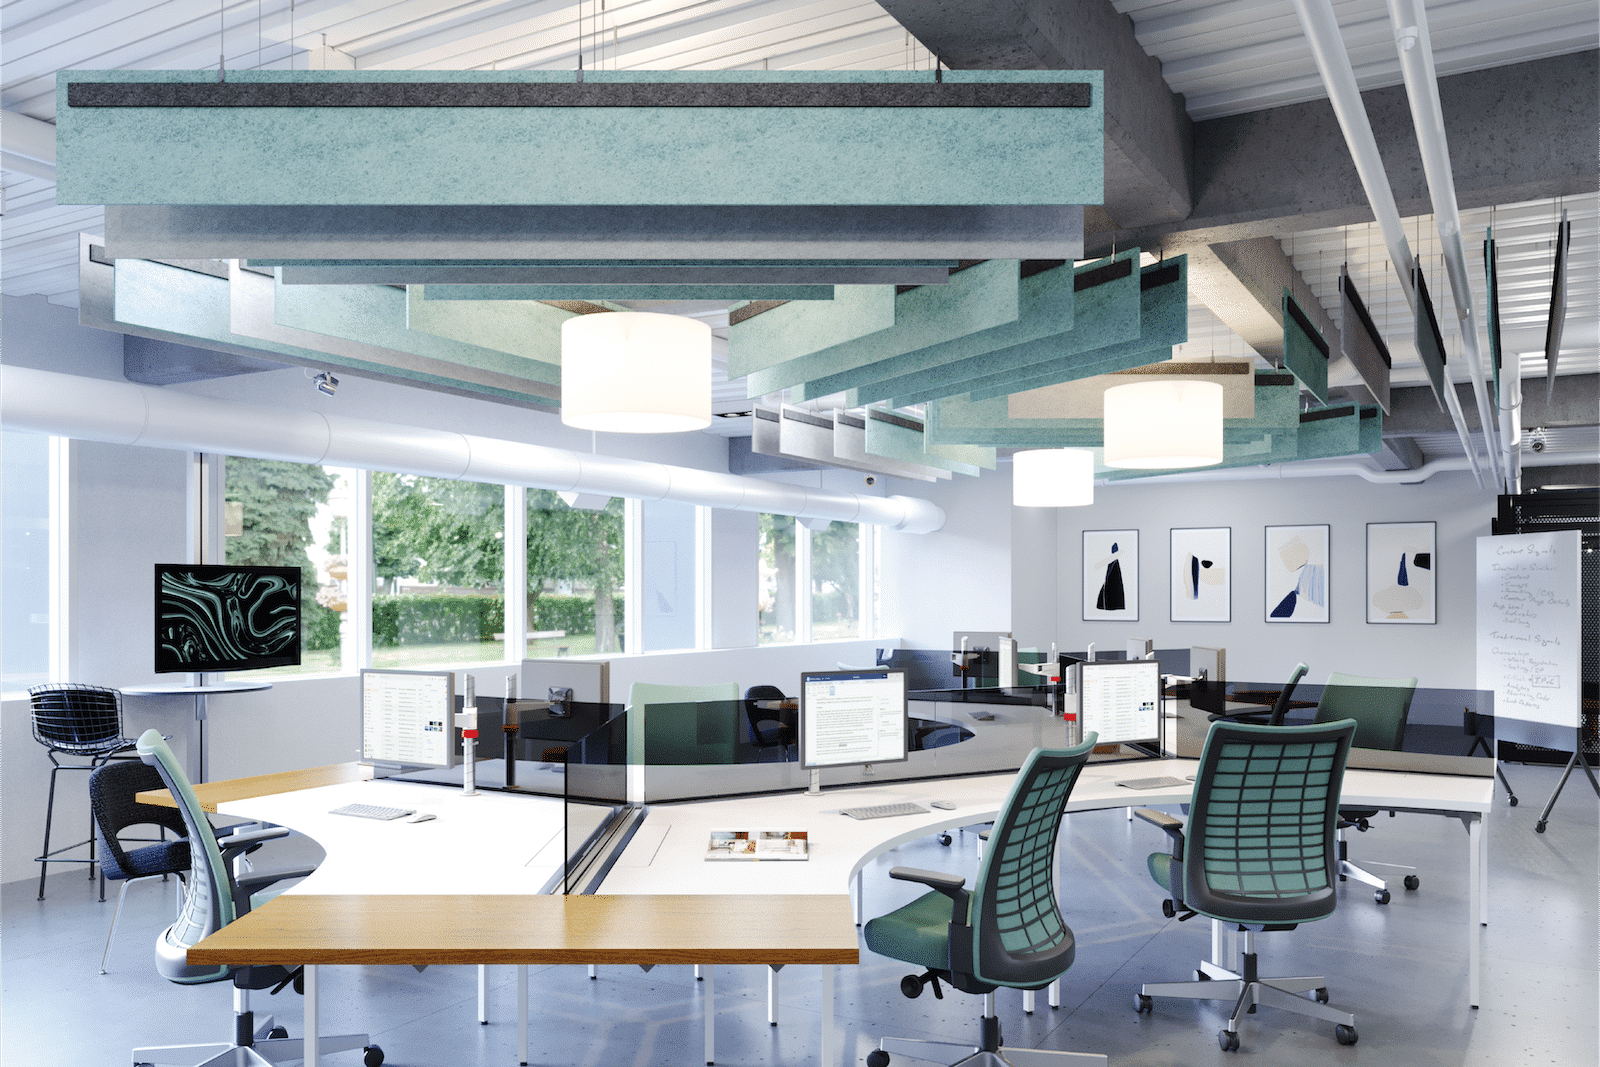 Acoustic felt baffles suspended from the ceiling of a modern office